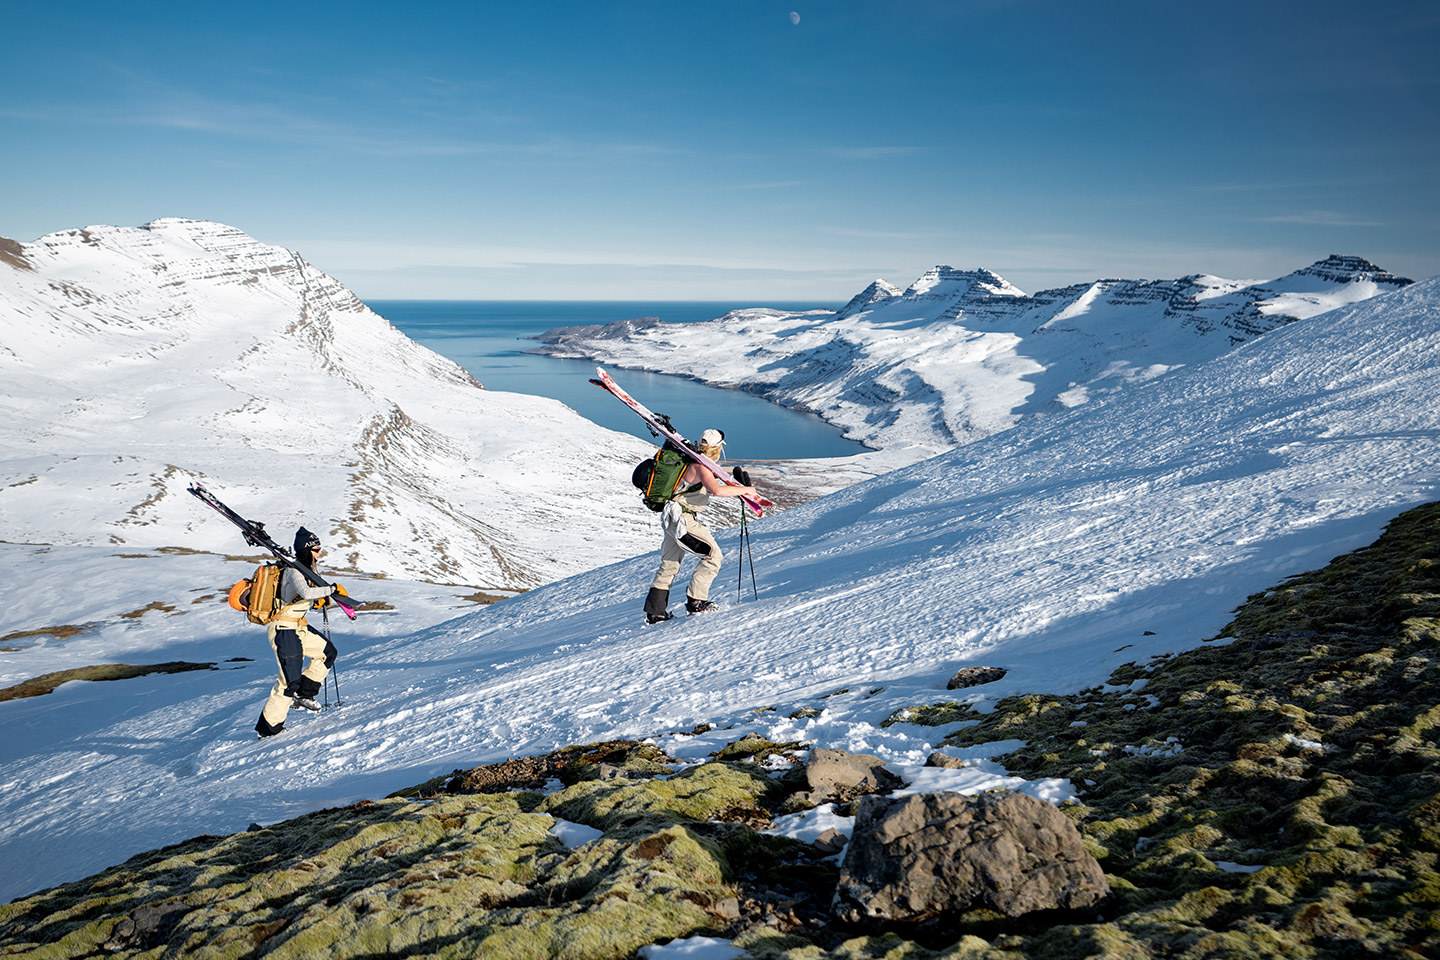 Two skiers are hiking up a snowy mountain in East Iceland. In the background, a beautiful fjord can be seen, with its deep blue waters extending out to the horizon.